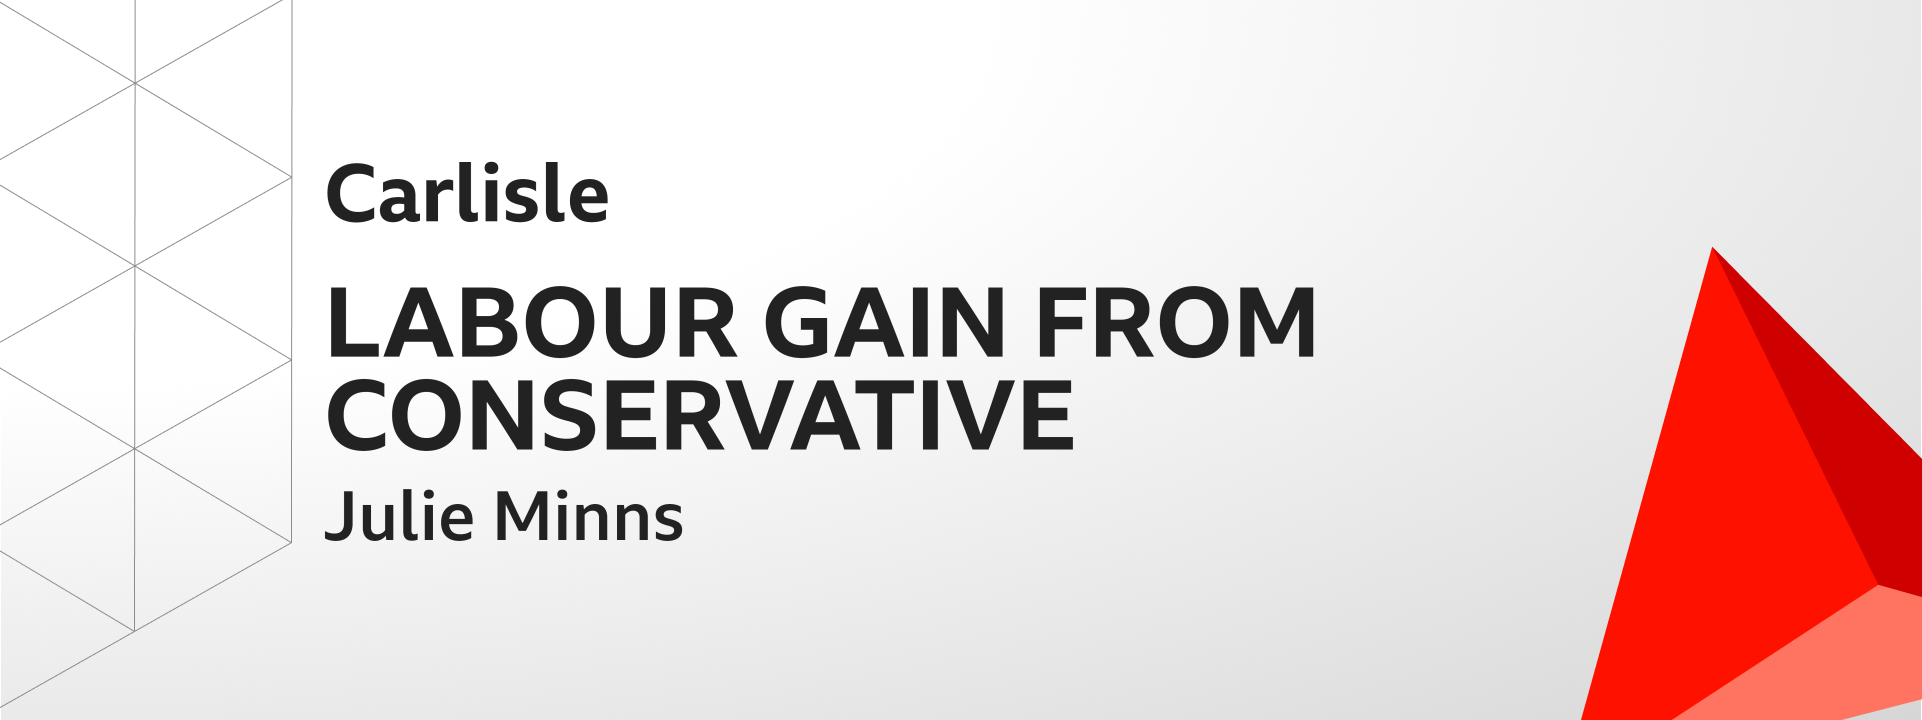 Graphic showing Labour gains Carlisle from the Conservatives. The winning candidate was Julie Minns.